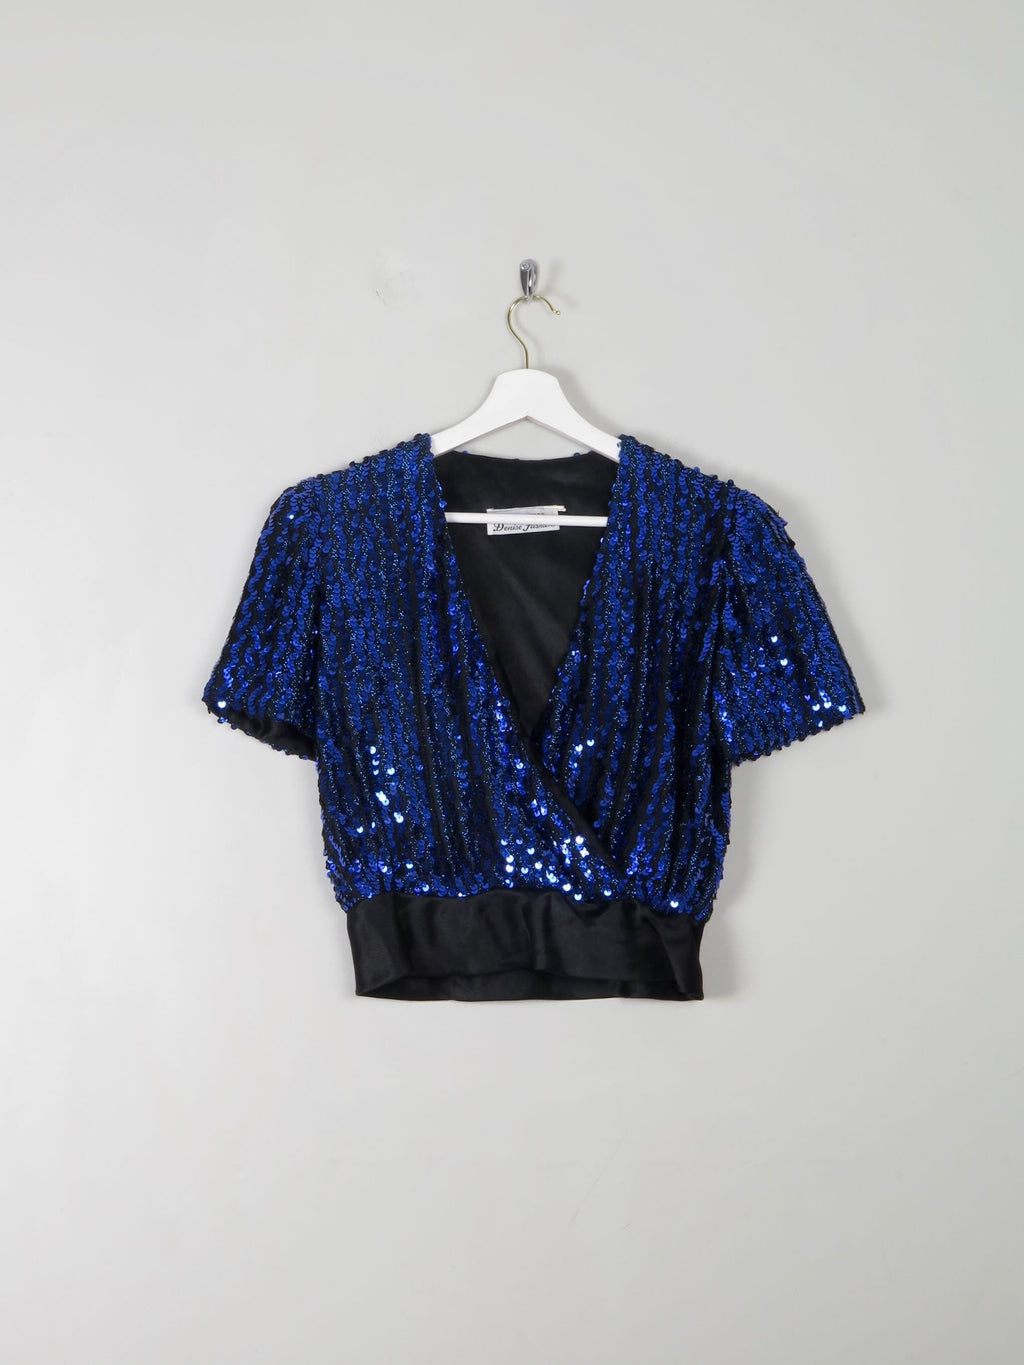 Women's Vintage  Electric Blue Sequin Cropped Top XS/S - The Harlequin